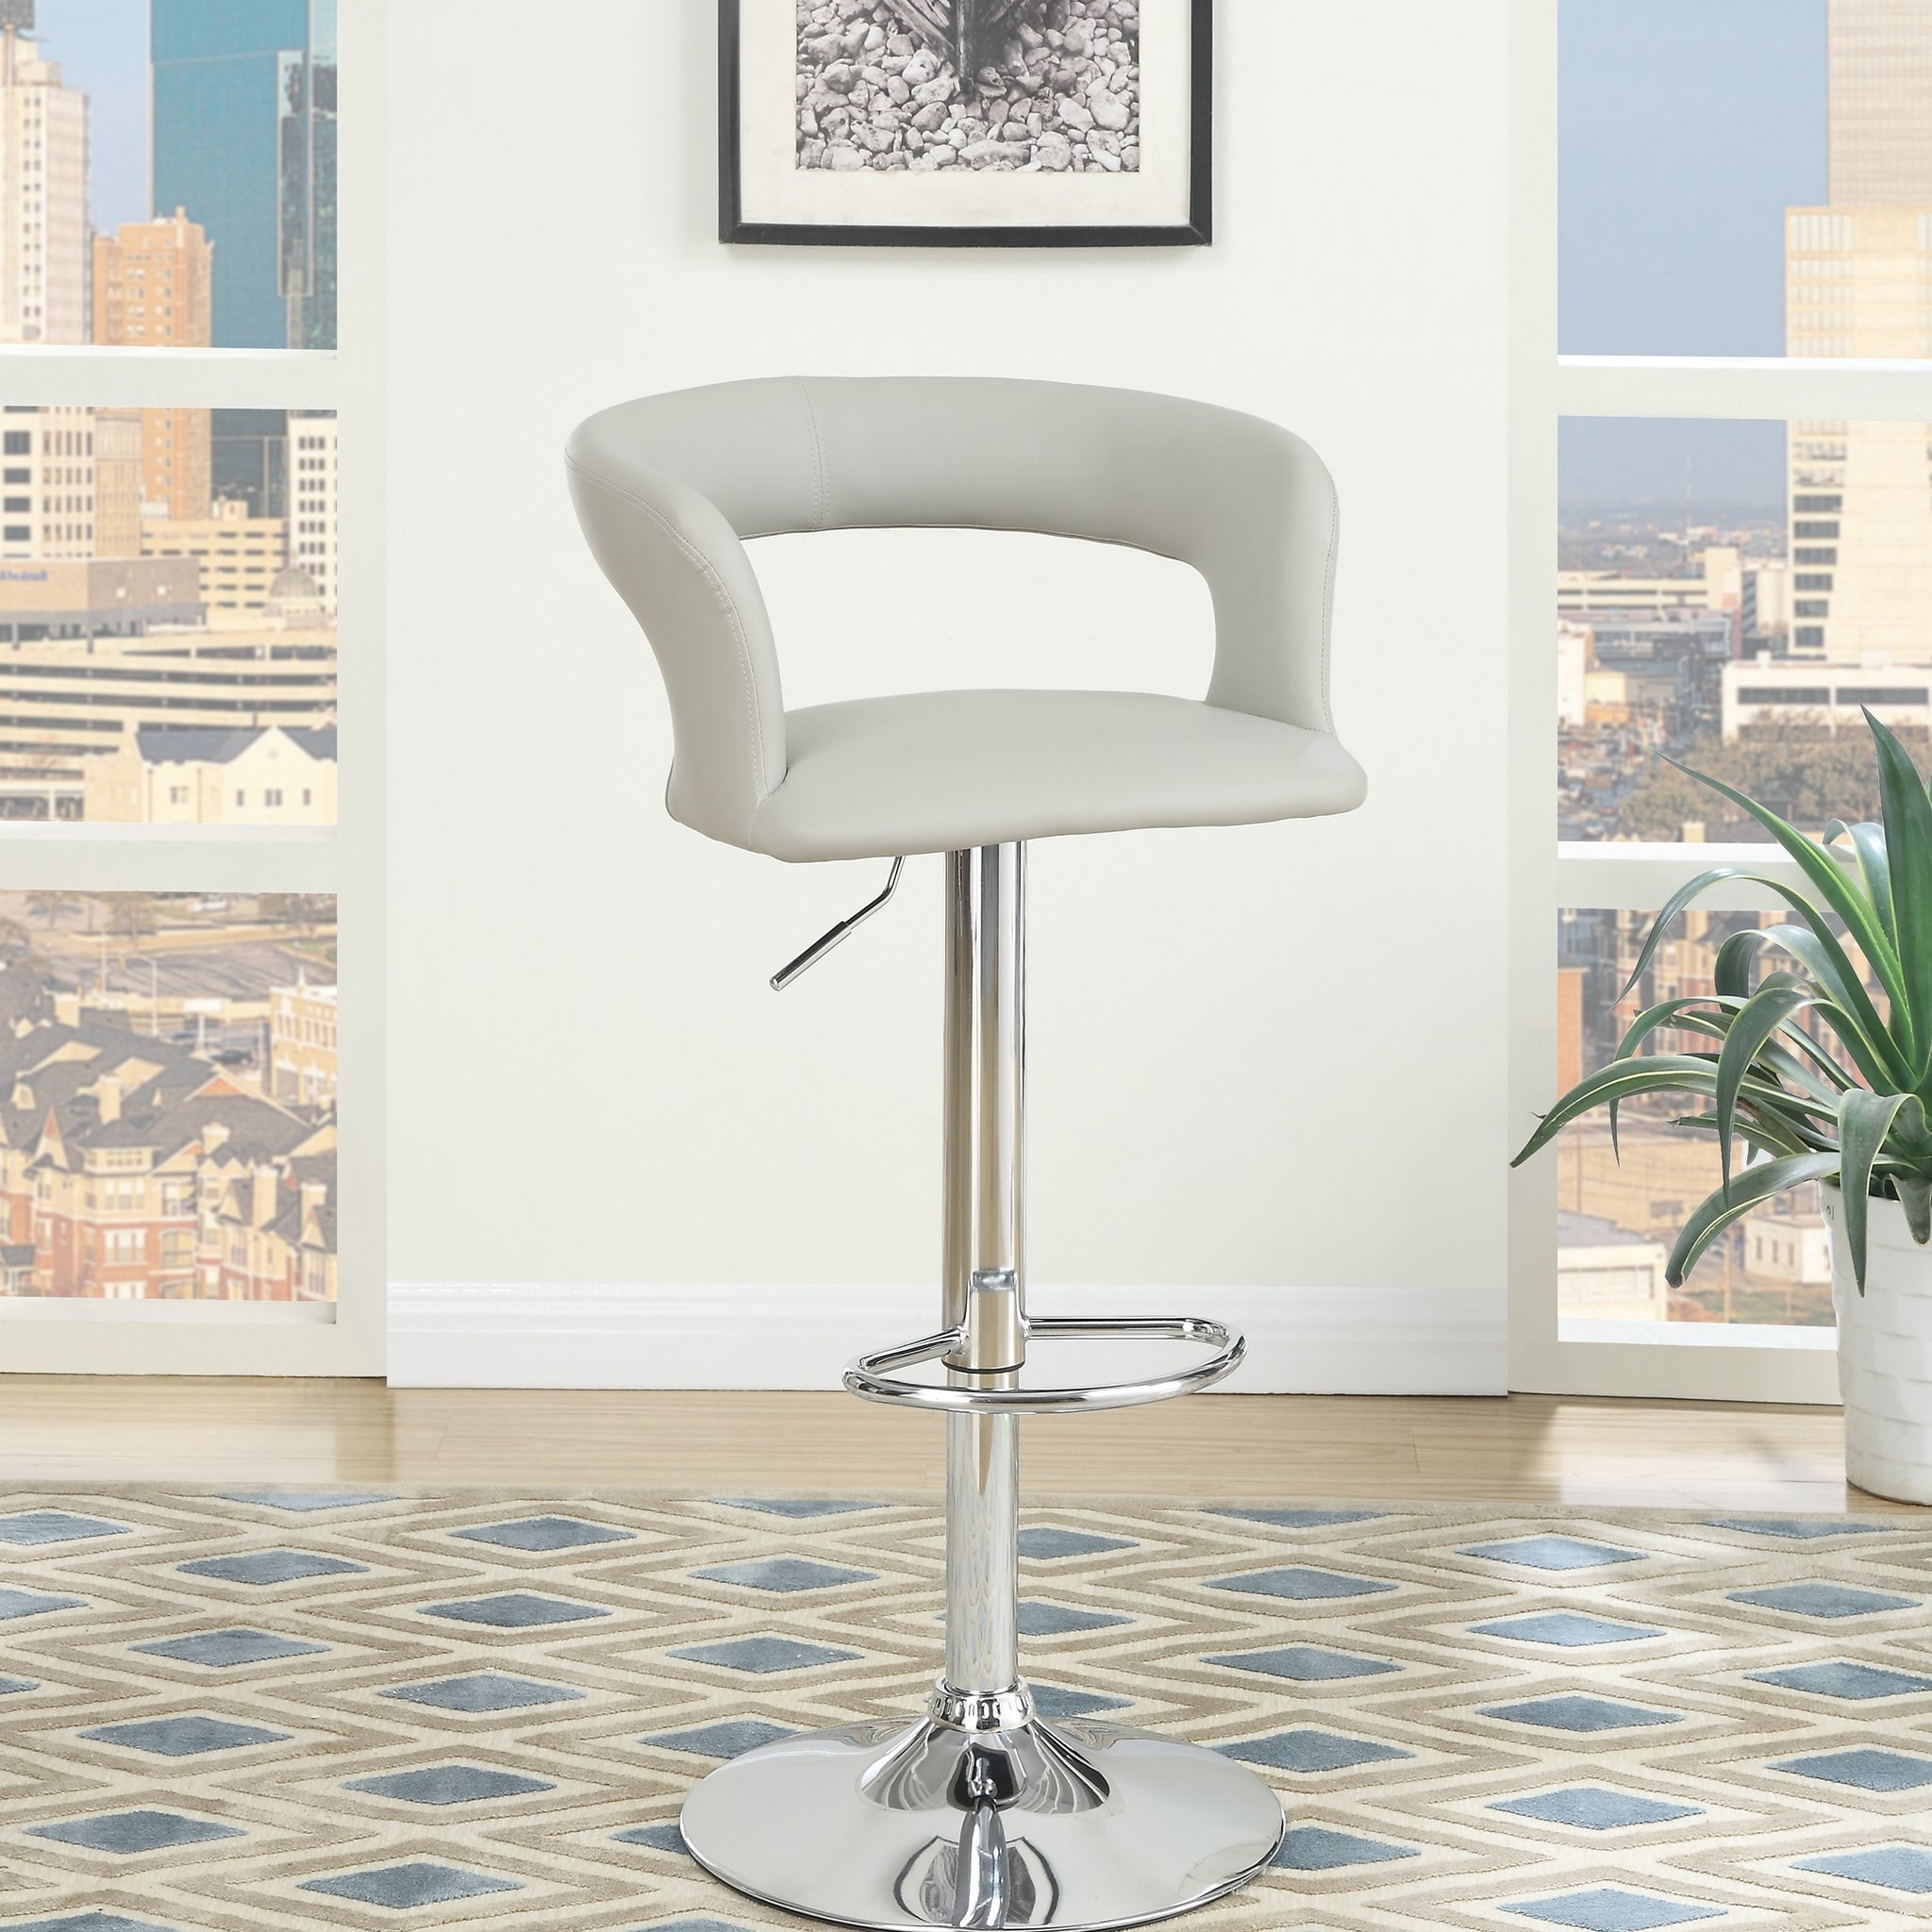 Bar Stool Counter Height Chairs Set of 2 Adjustable gray-dining room-modern-fabric